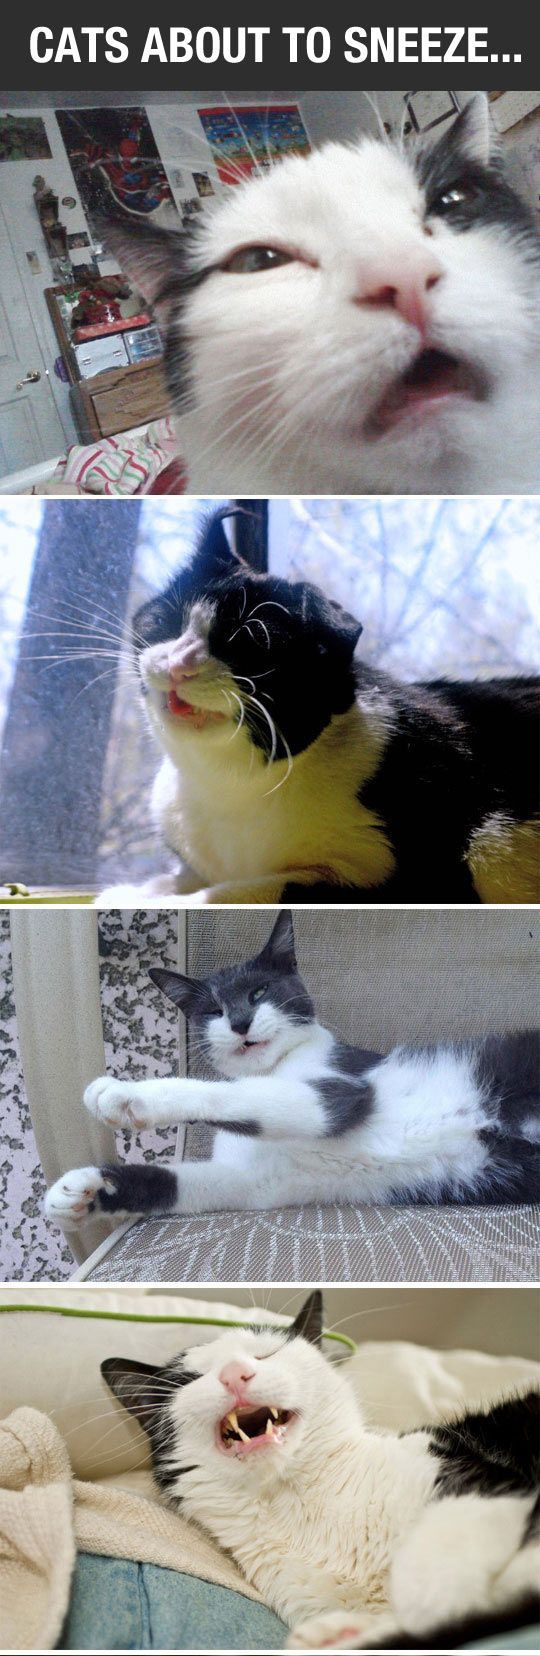 Cats about to sneeze These pictures are everything! LOL!!